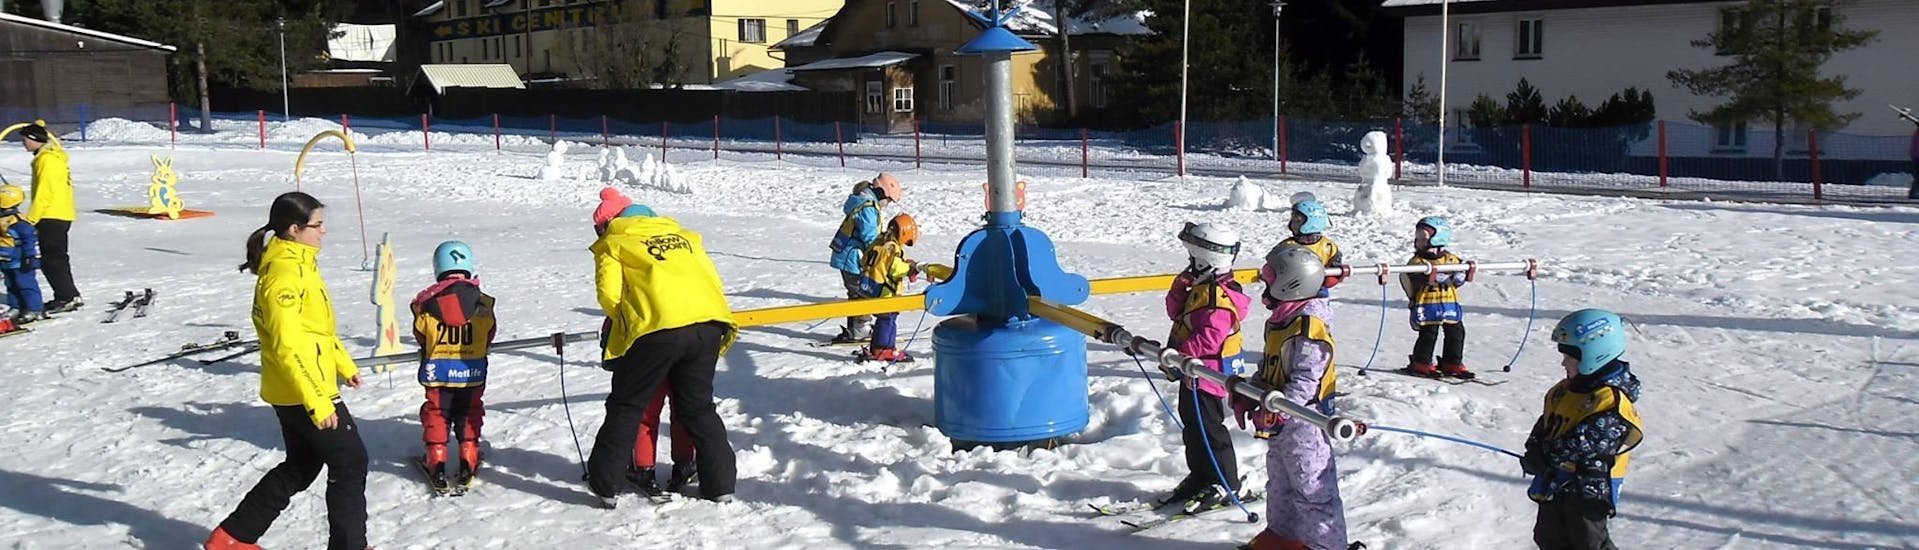 Private Ski Lessons for Toddlers (1-3 y.)  with Ski School Yellow Point Herlíkovice - Hero image